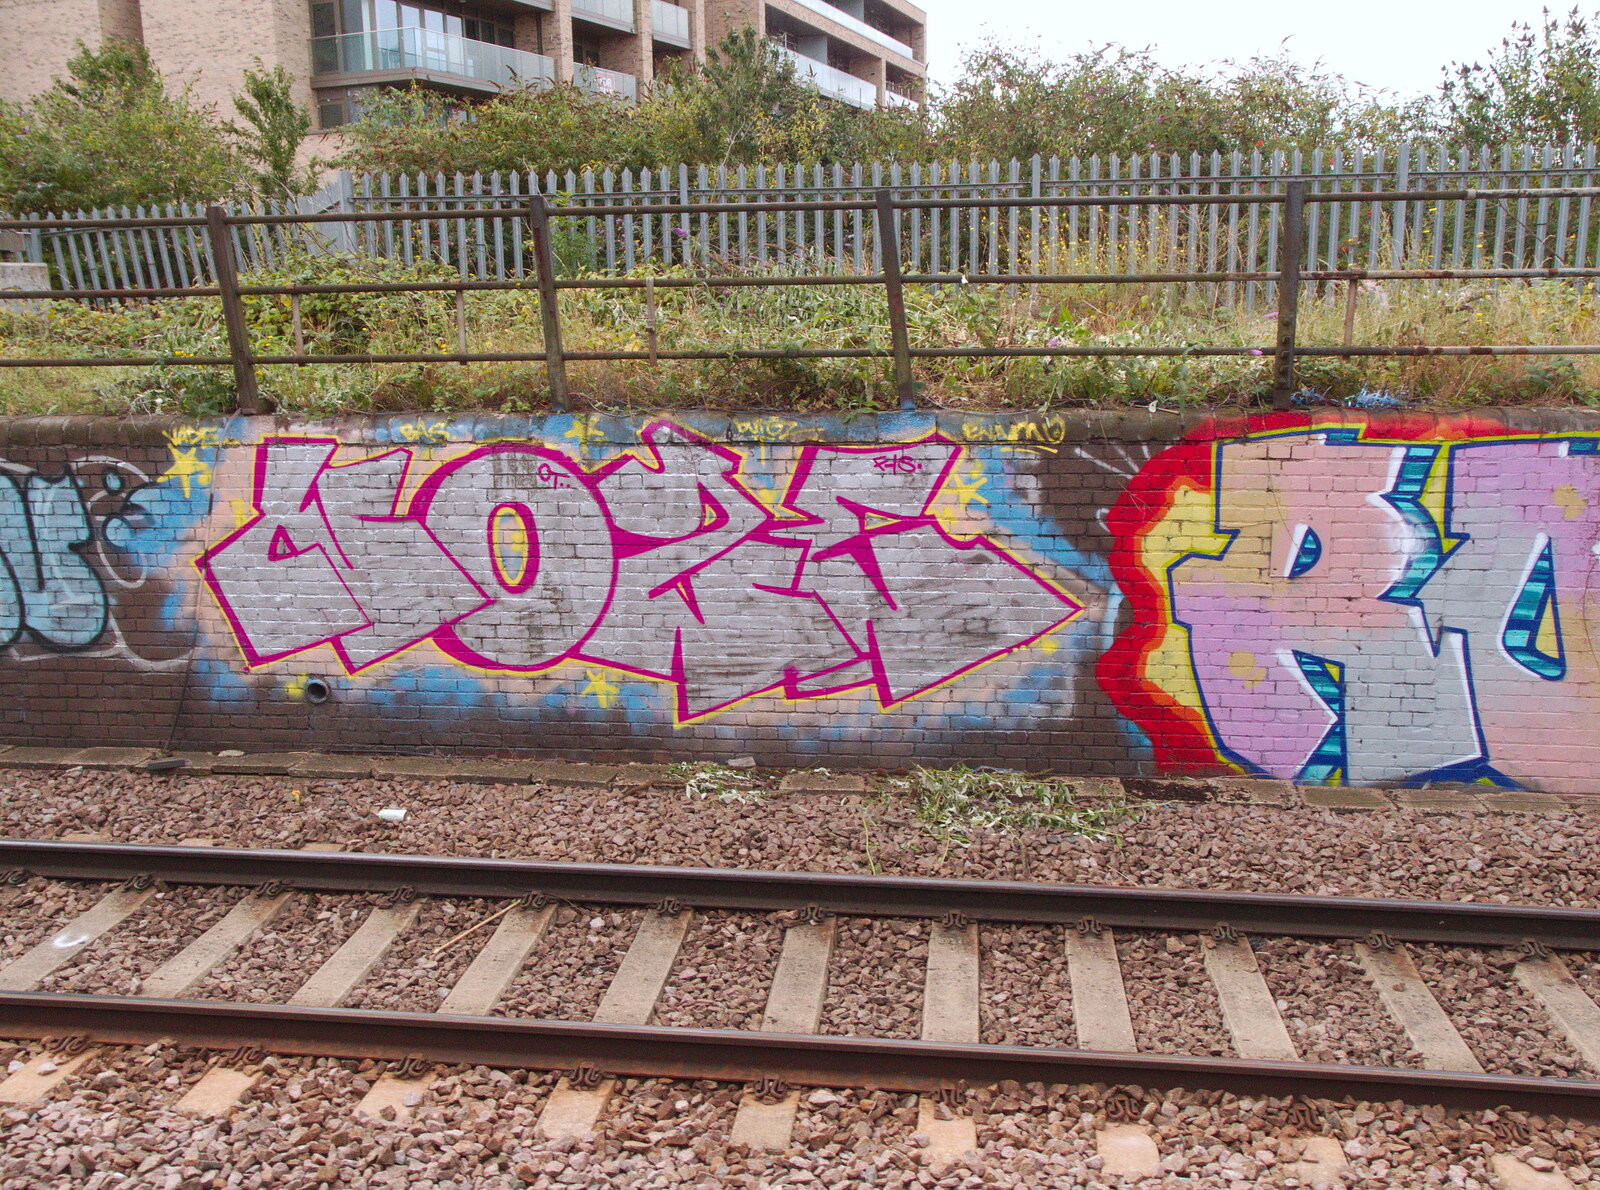 New brightly-coloured graffiti from The BSCC at Redgrave and Railway Graffiti, Suffolk and London - 7th August 2019